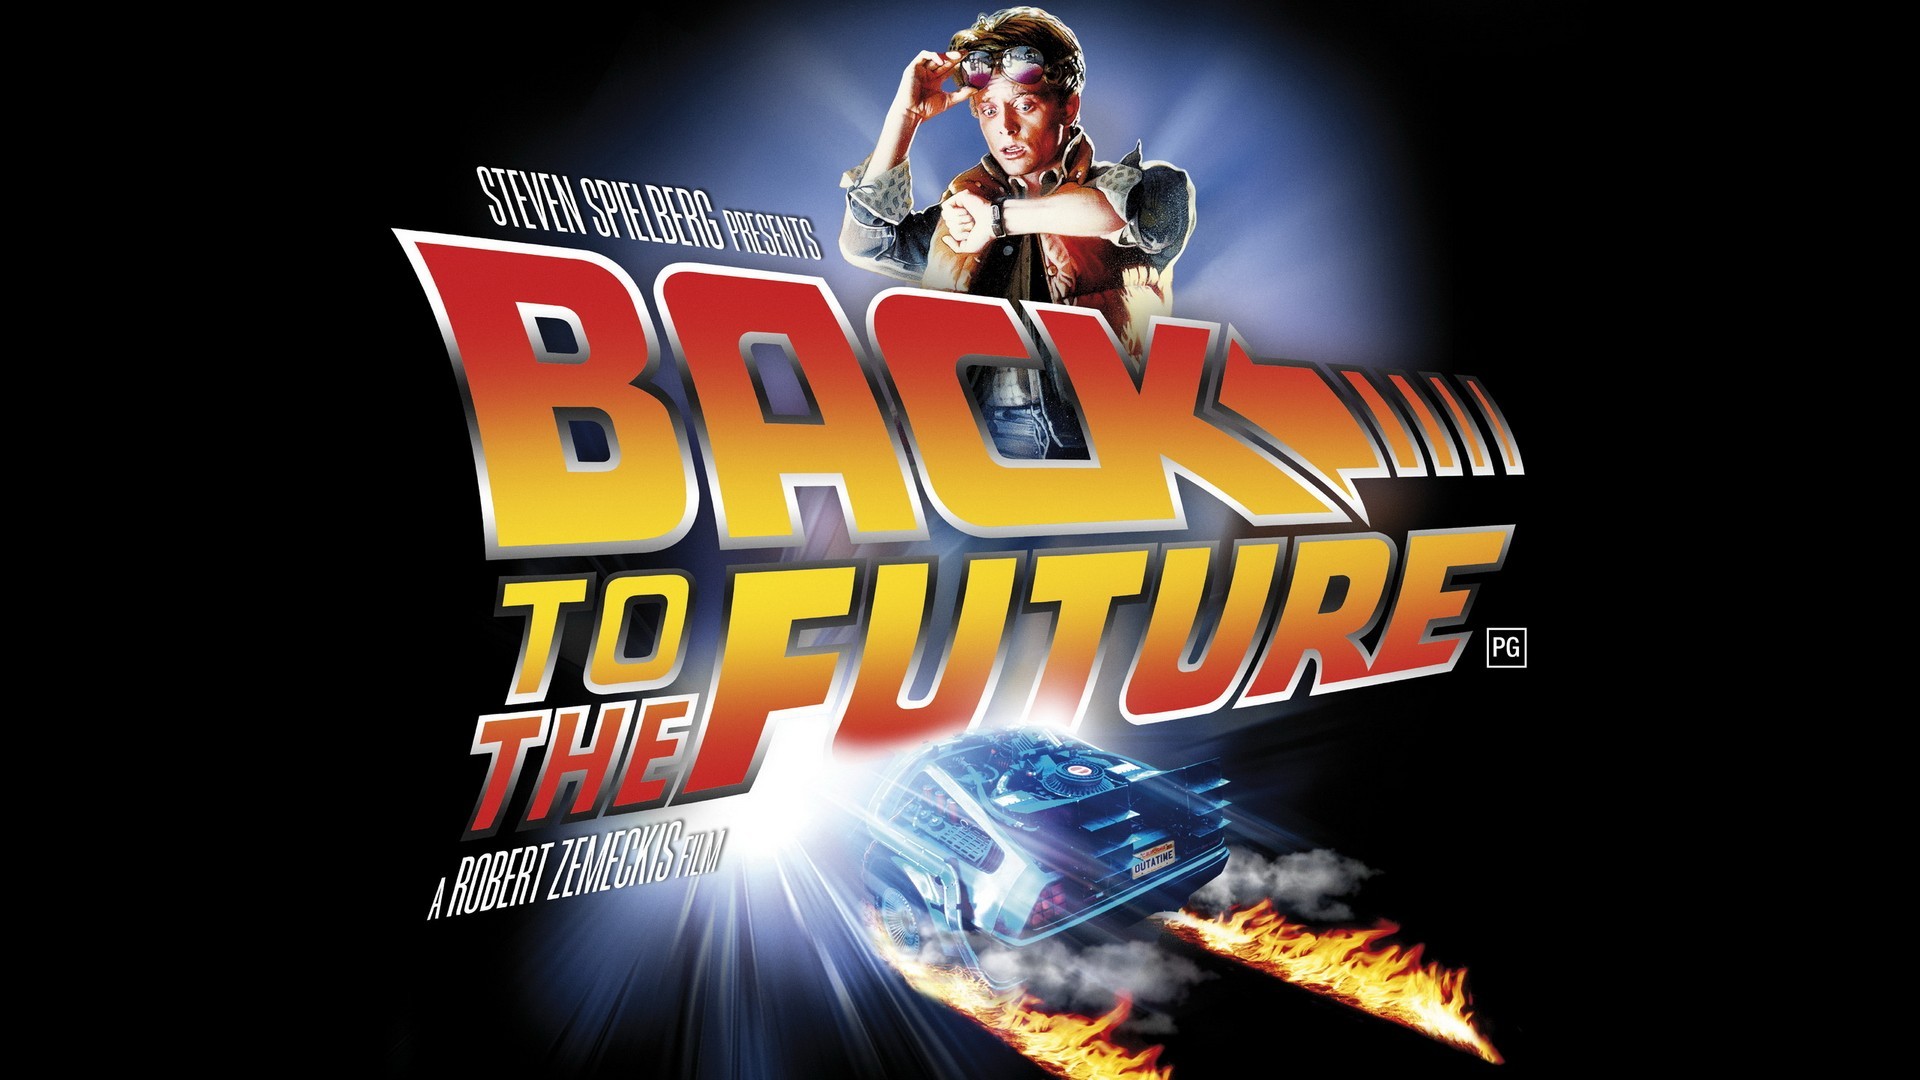 General 1920x1080 Back to the Future movies movie poster logo Michael J. Fox science fiction Robert Zemeckis